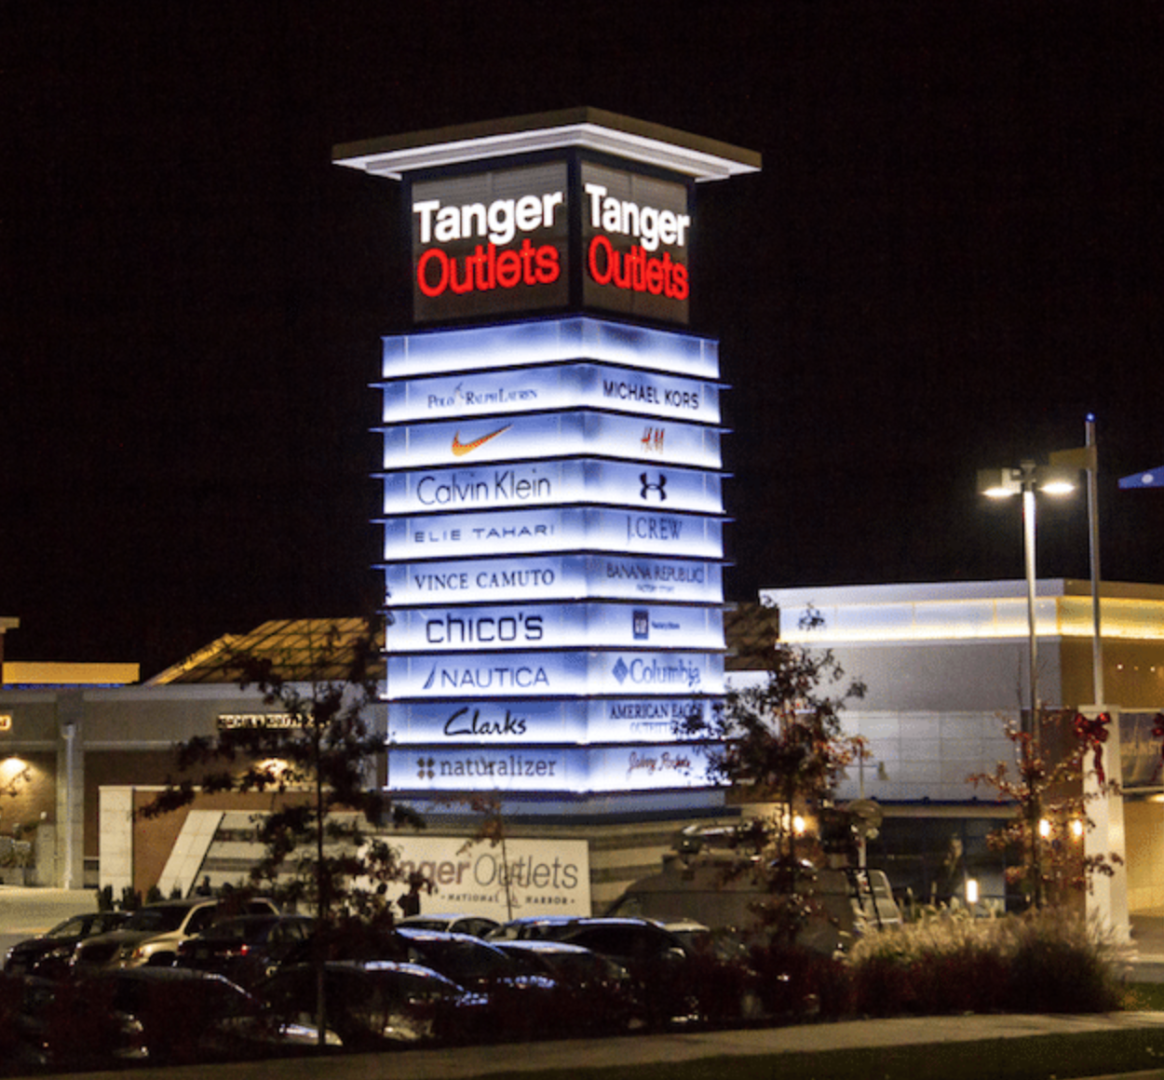 National Harbor Tanger Outlets Mall